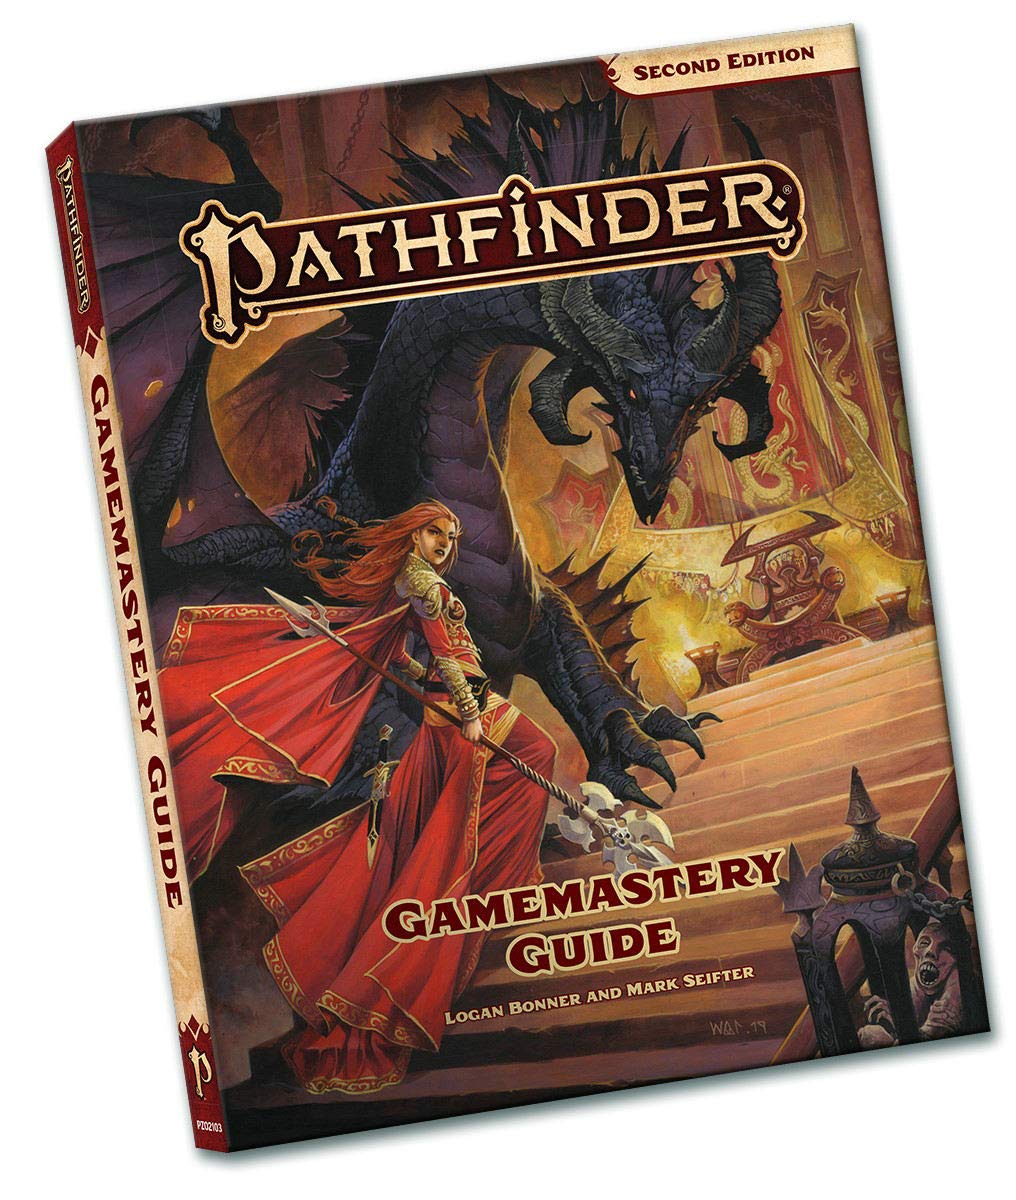 Pathfinder 2nd Edition: Gamemastery Guide - Pocket Edition